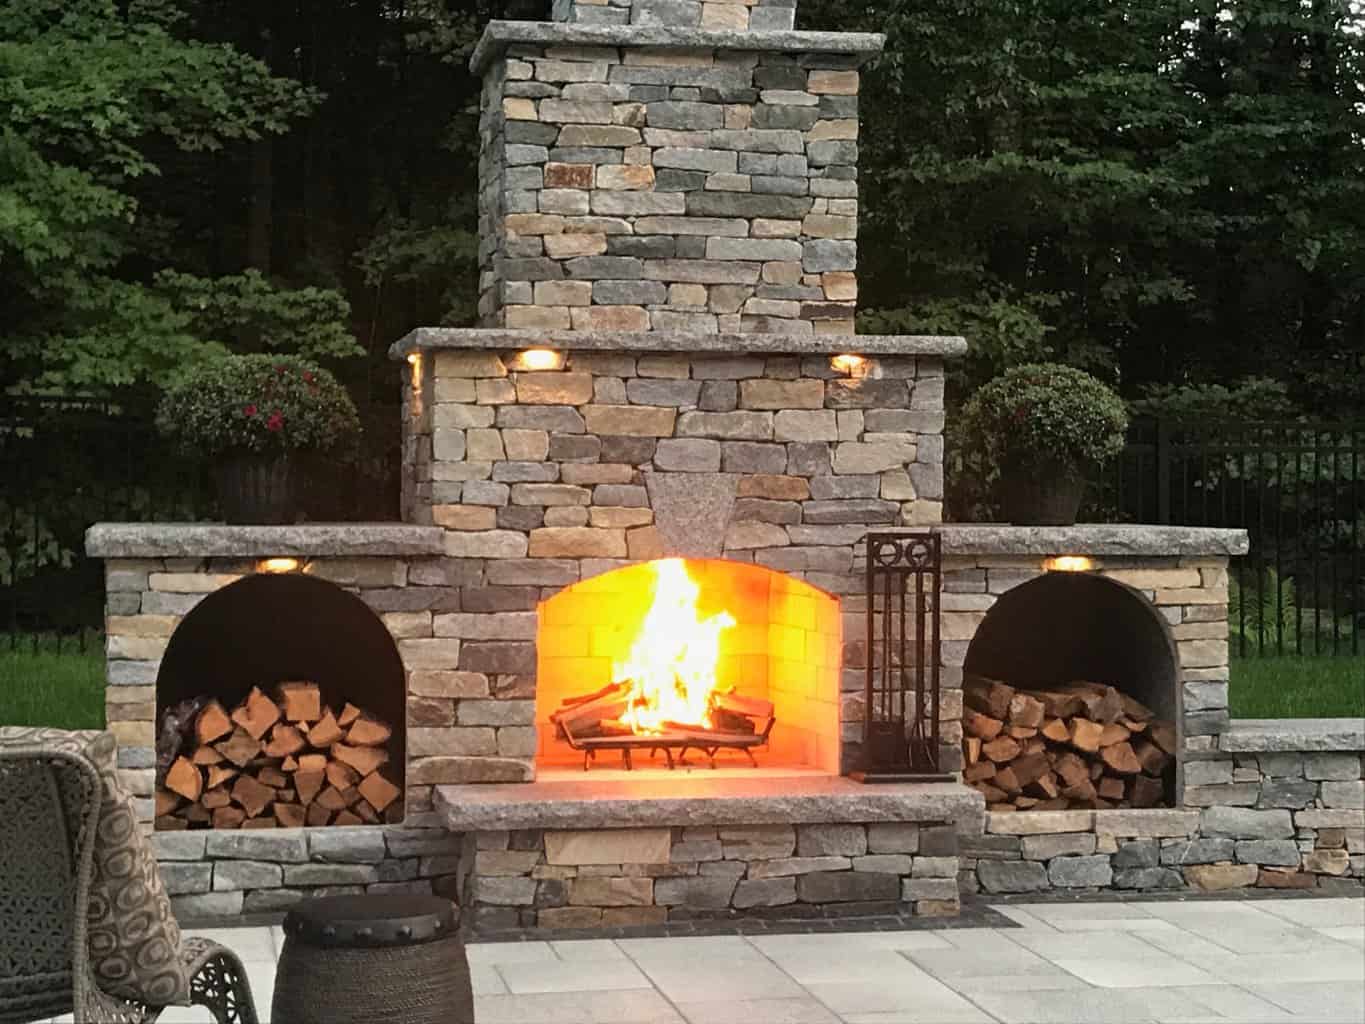 Contractor Series Fireplace with Wood Arched Storage boxes-front view